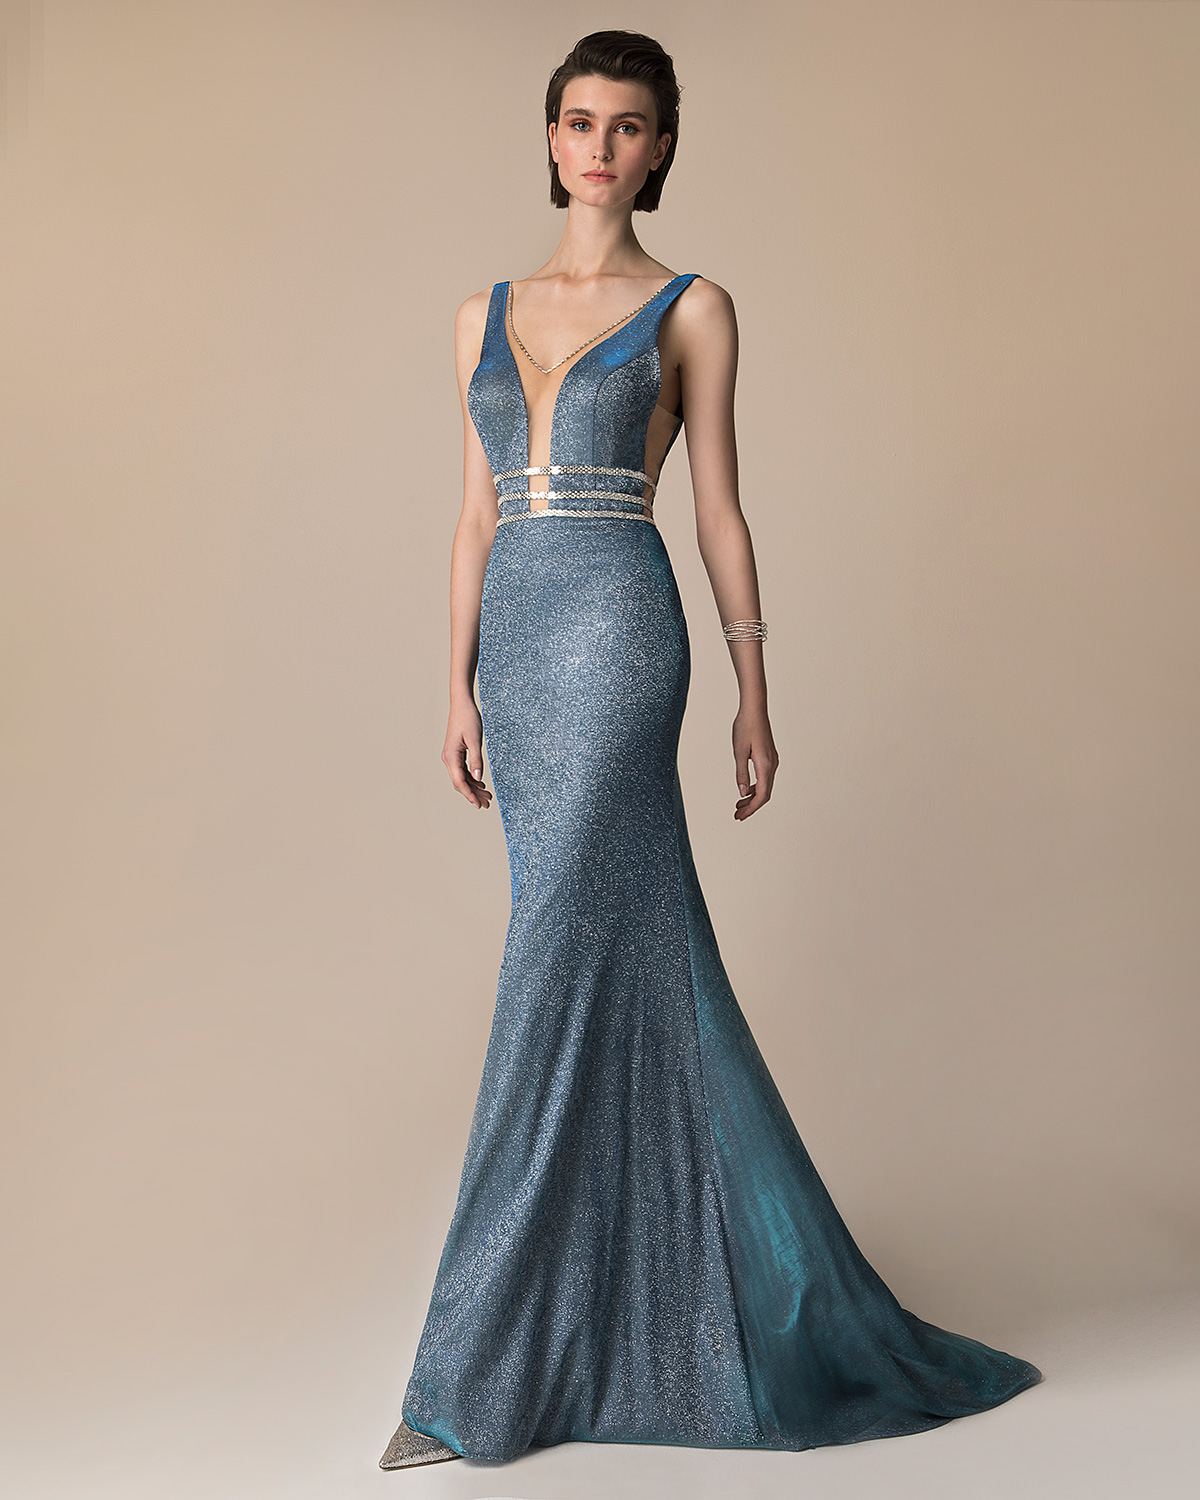 Long evening  dress with shining fabric,  beaded waist and open back